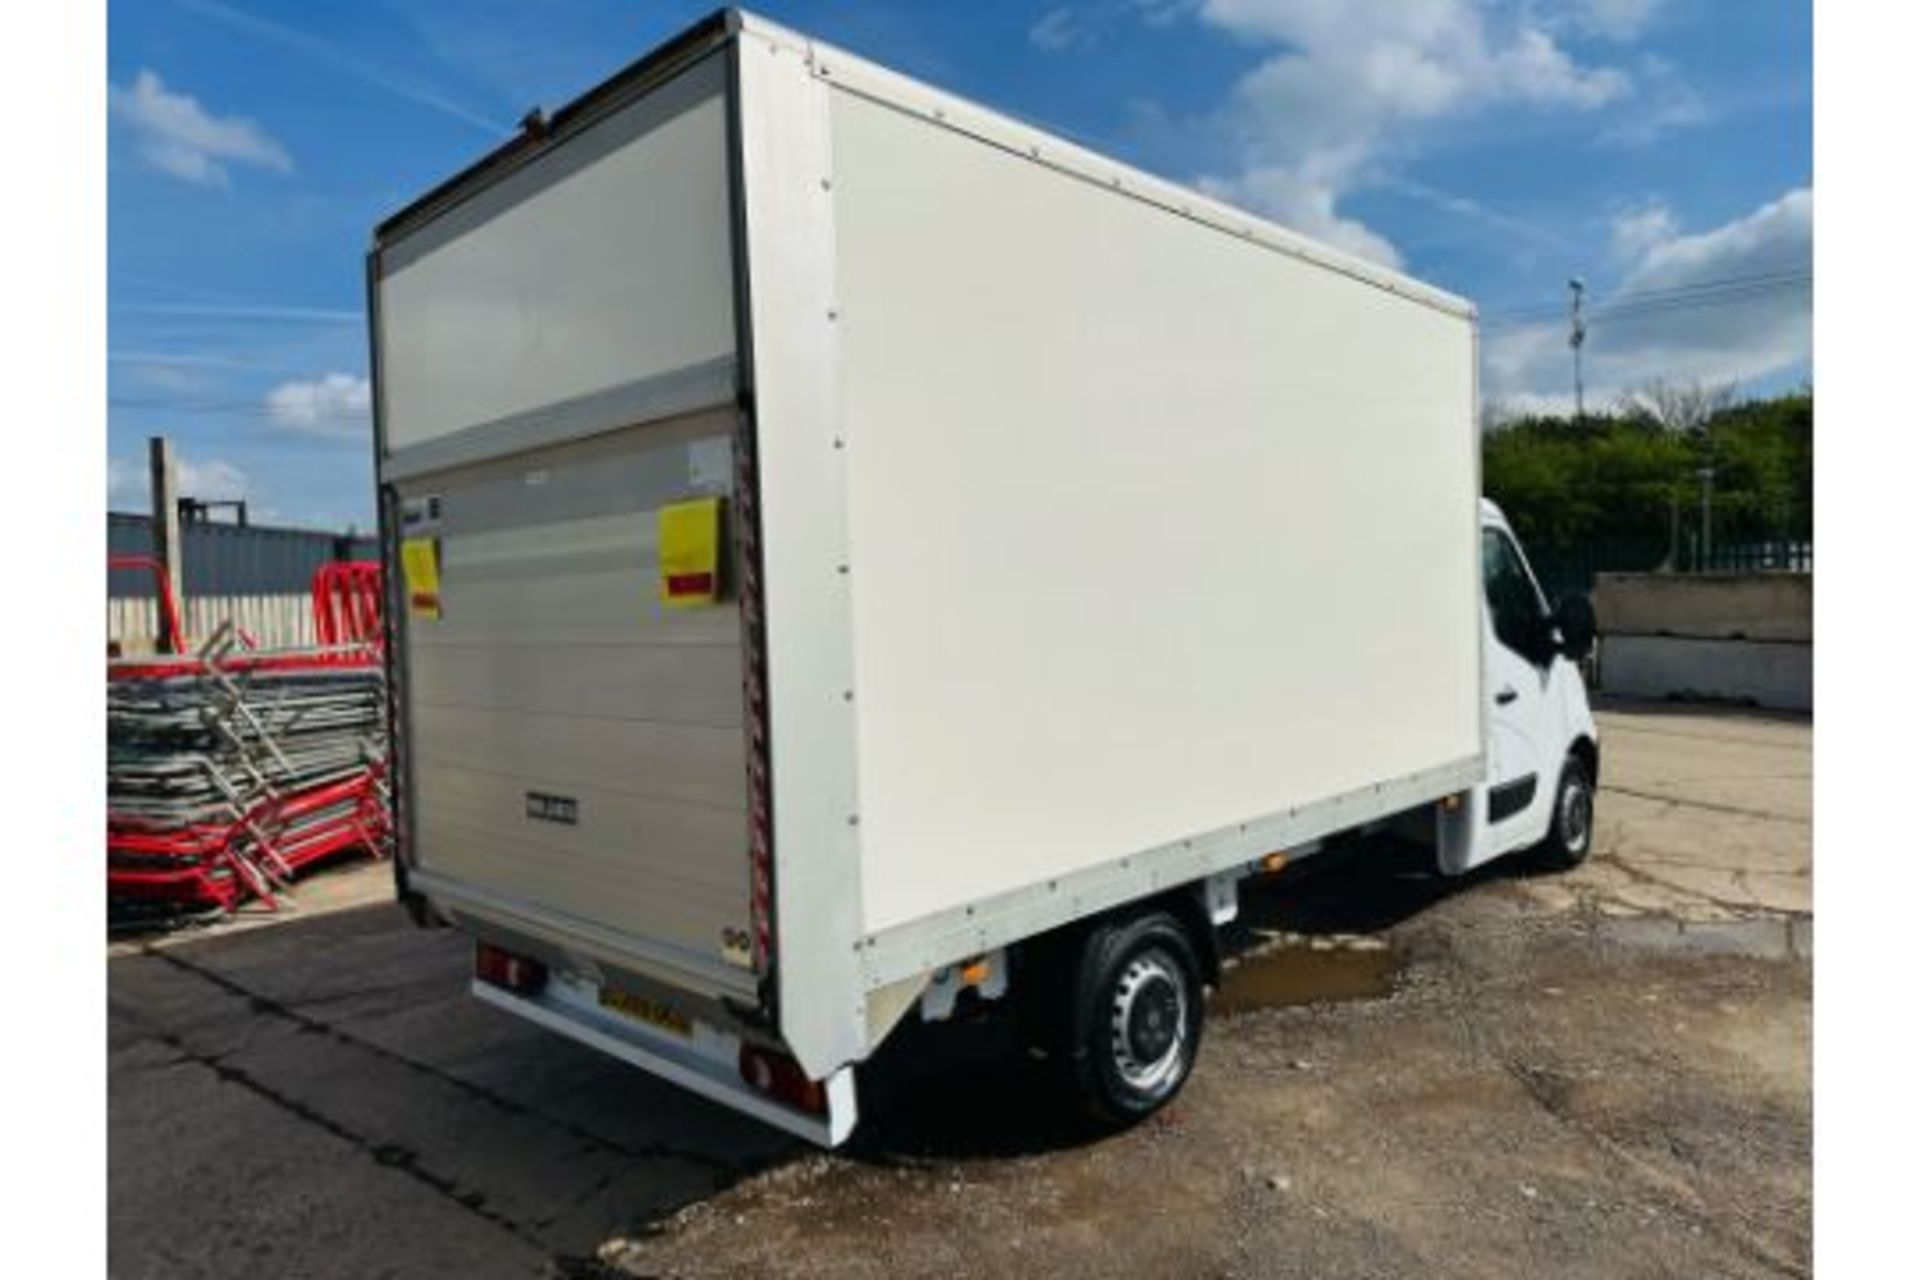 Reserve Met -RENAULT MASTER 2.3DCI (130) Business Edition Lwb Box Van With Electric Tail Lift 68 Reg